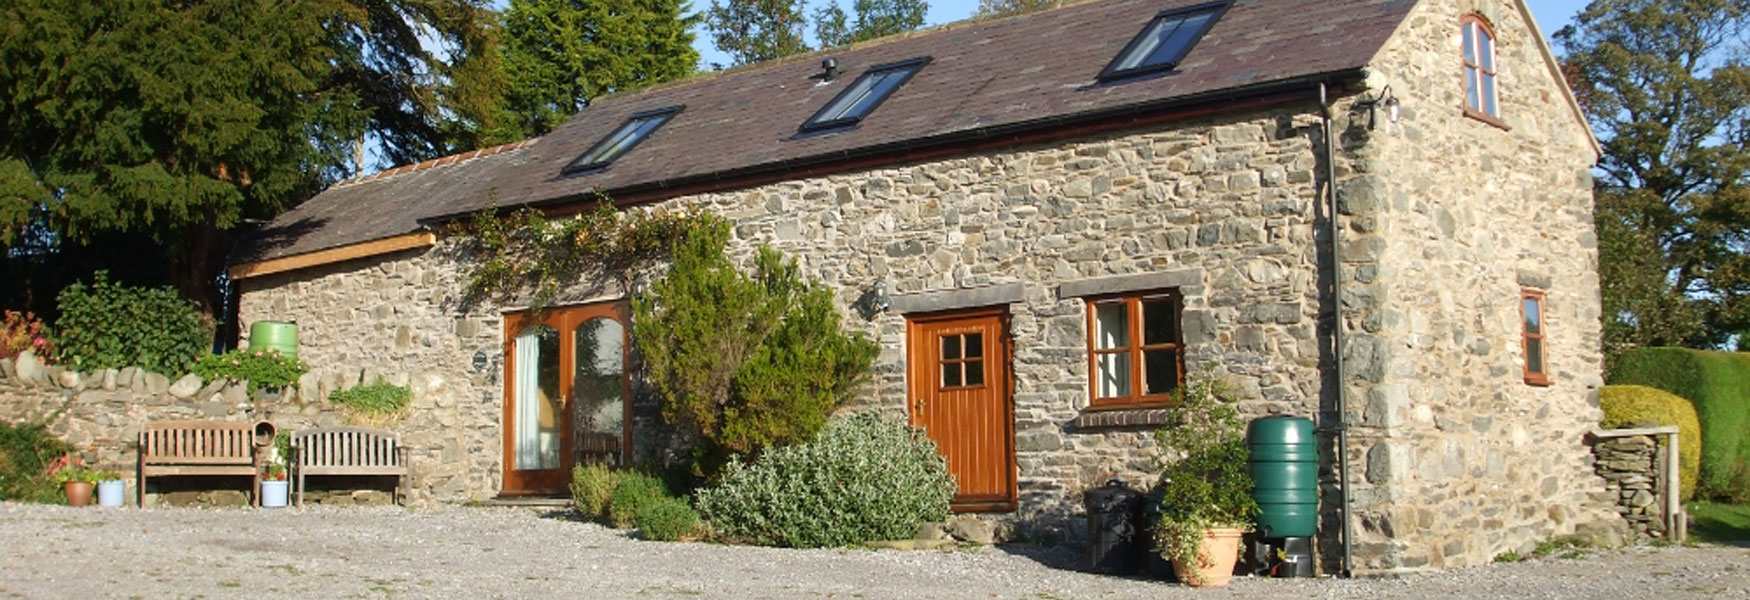 Holidays Cottages In North Wales